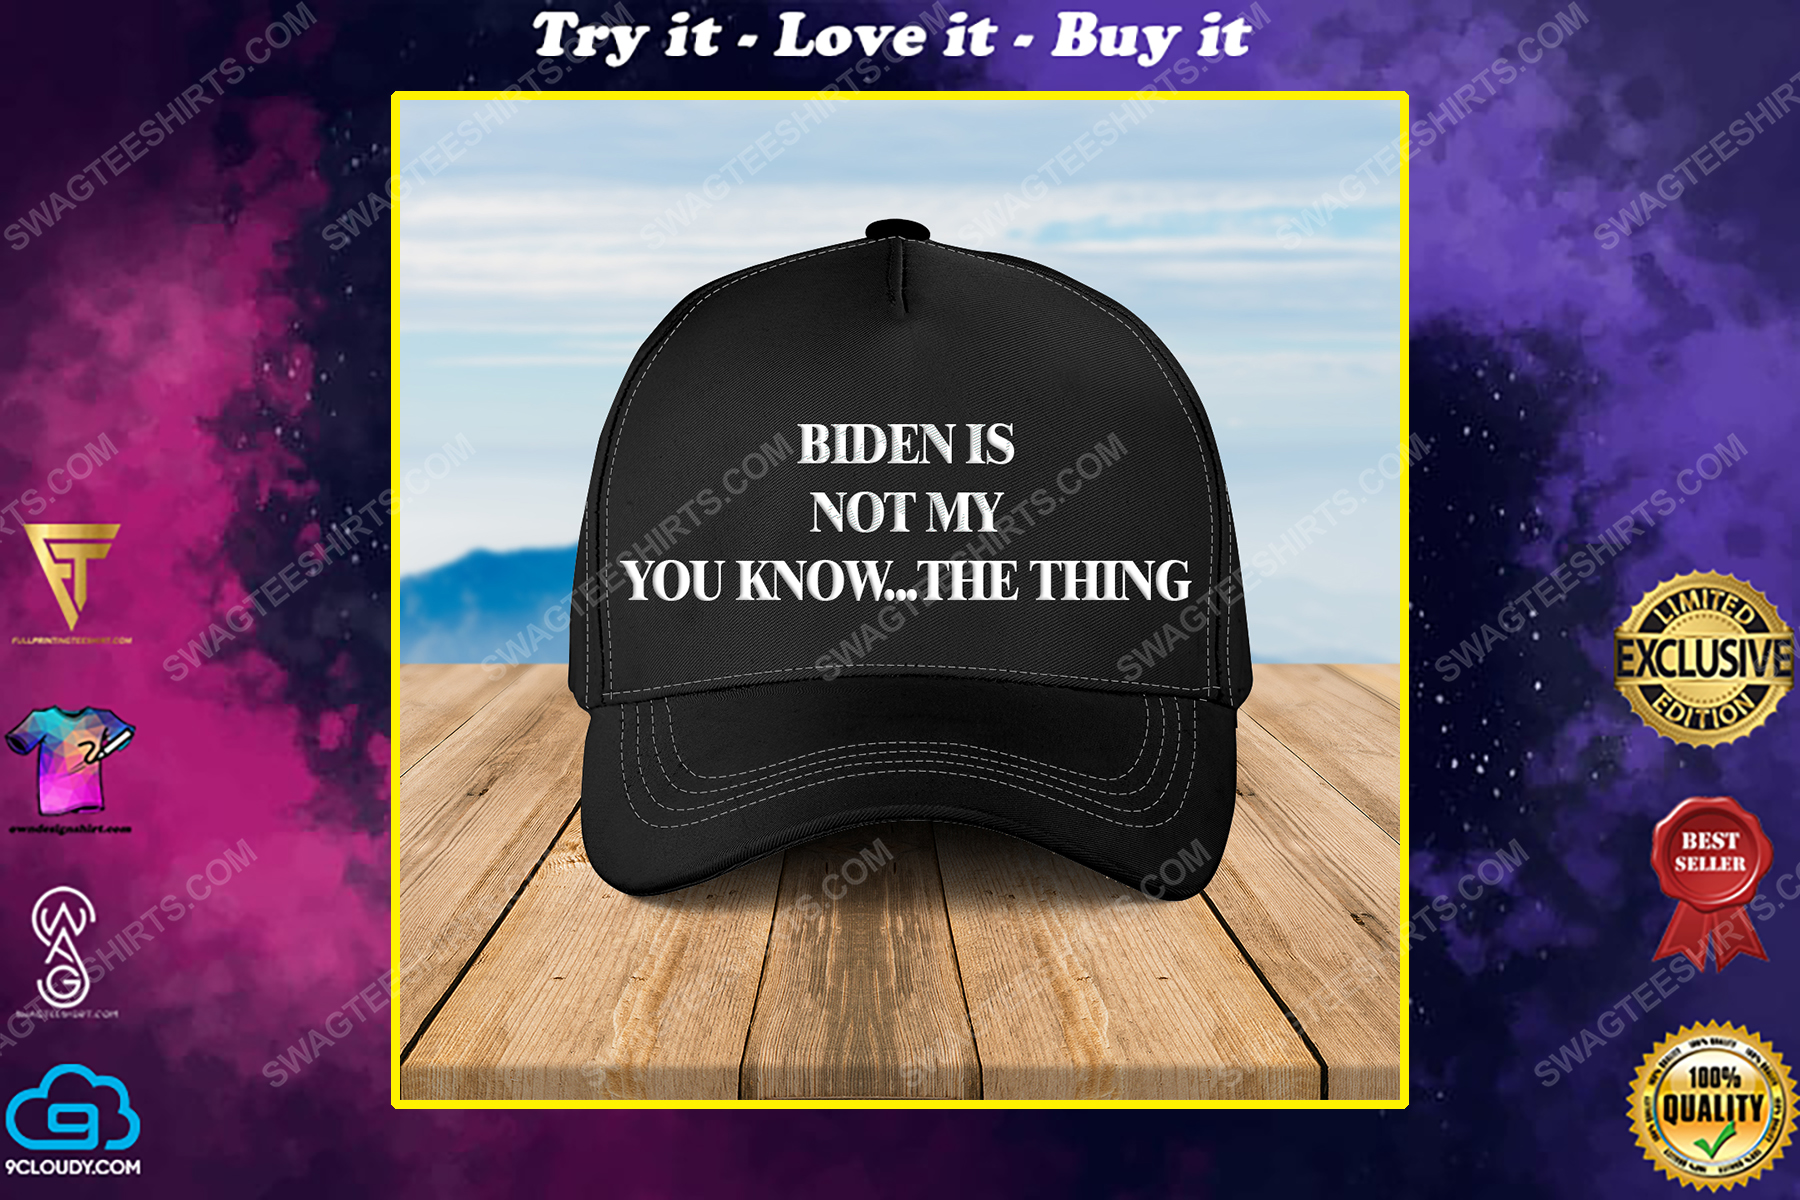 Biden is not my you know the thing full print classic hat